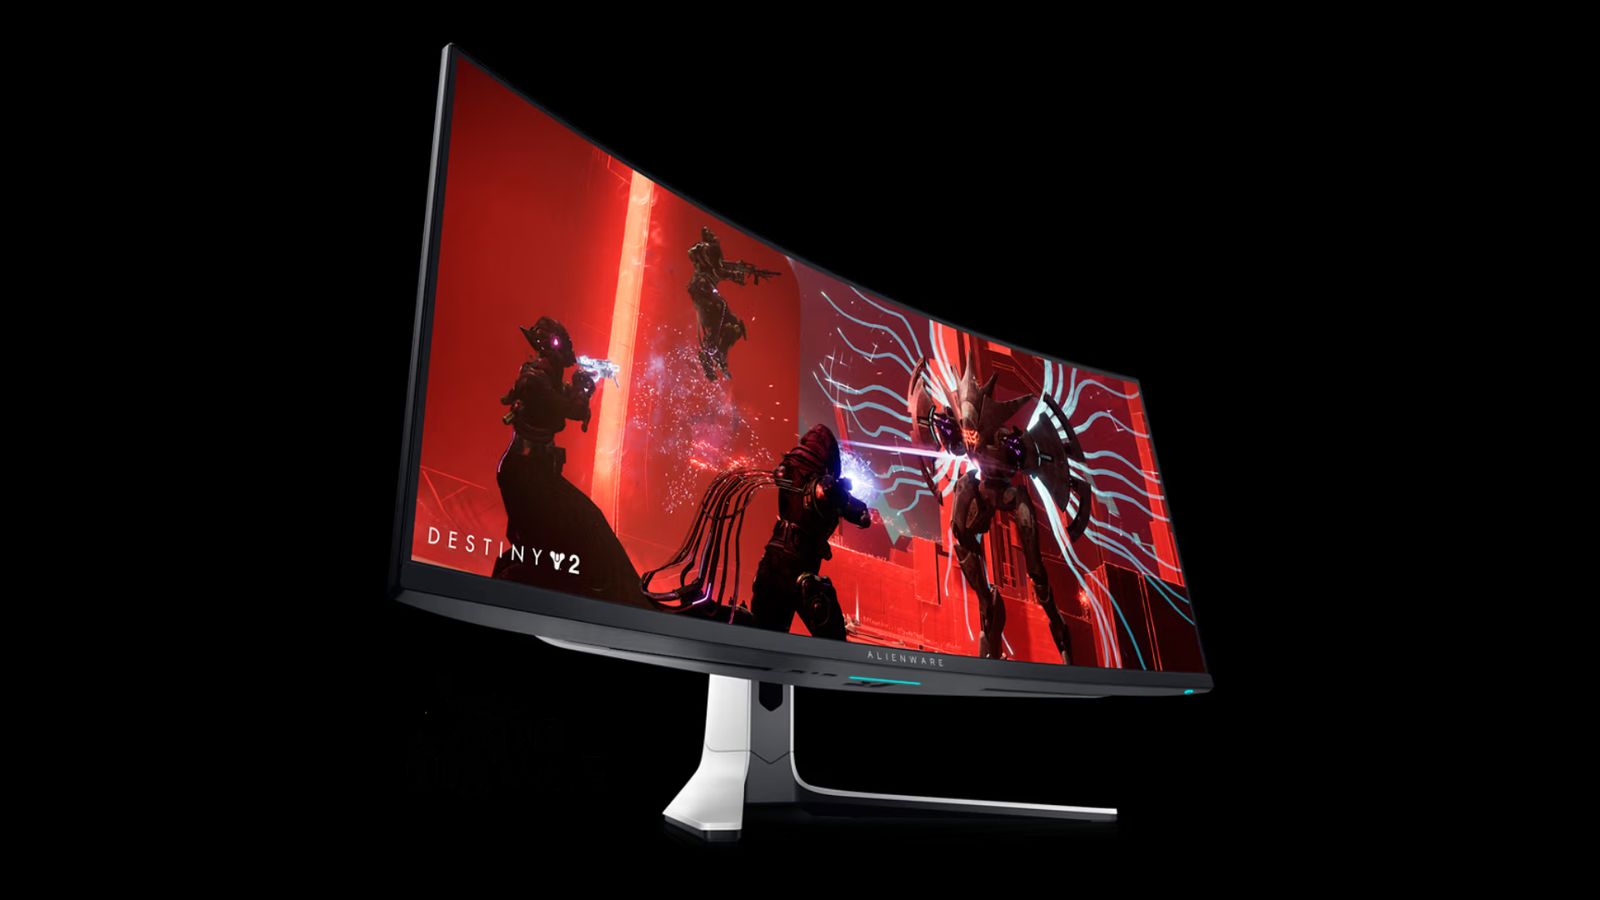 Alienware AW3423DW QD-OLED product image of a white and grey monitor with Destiny 2 gameplay on the display.